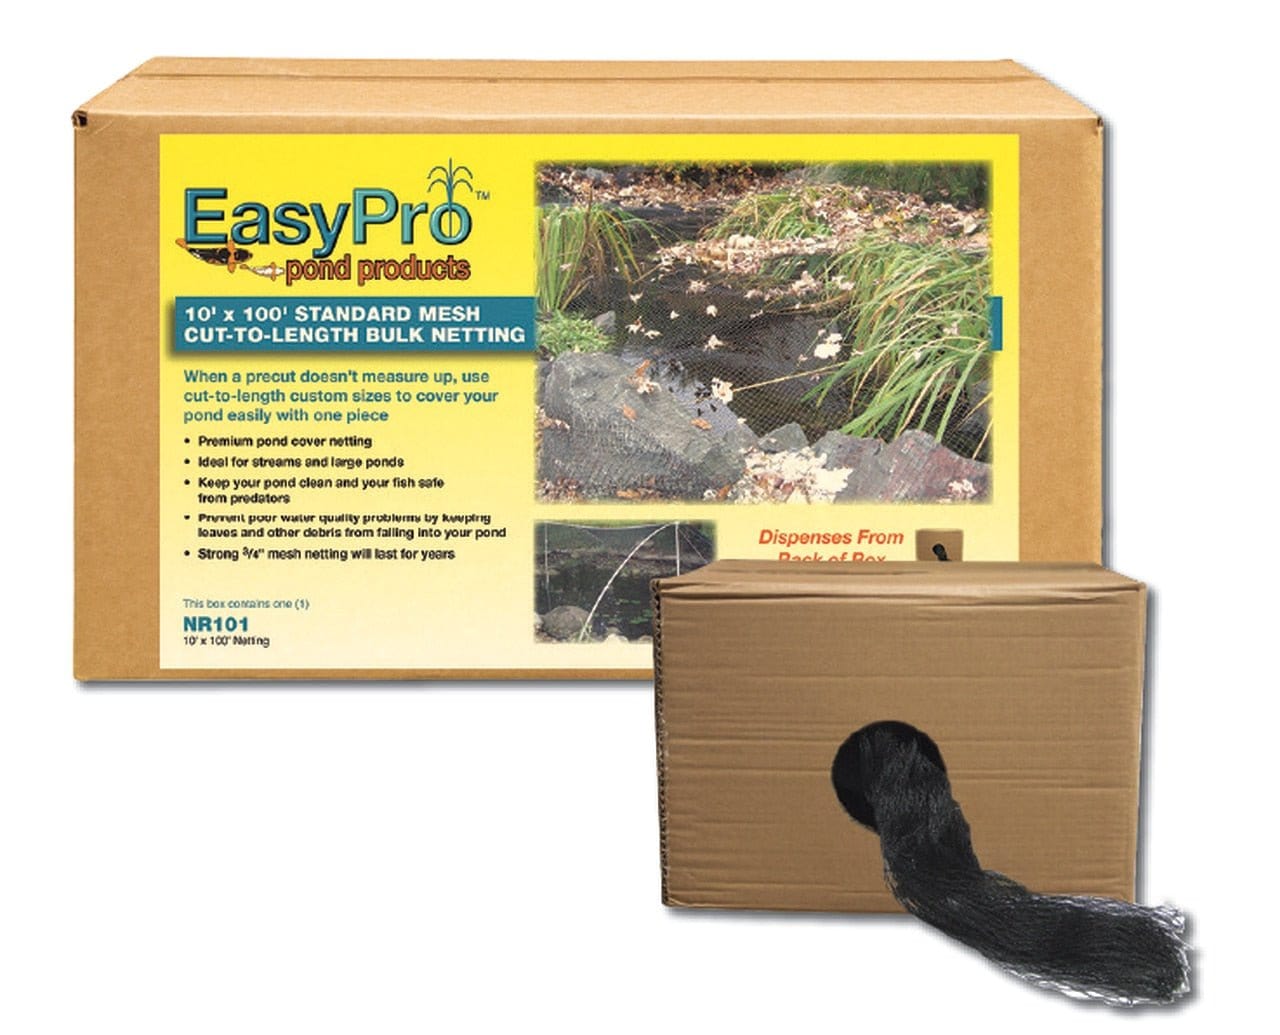 EasyPro Nets and Netting Premium - 3/4" / Boxed 10' x 100' EasyPro Black Pond Netting Black Pond Netting | Fish Pond Cover for Leaves